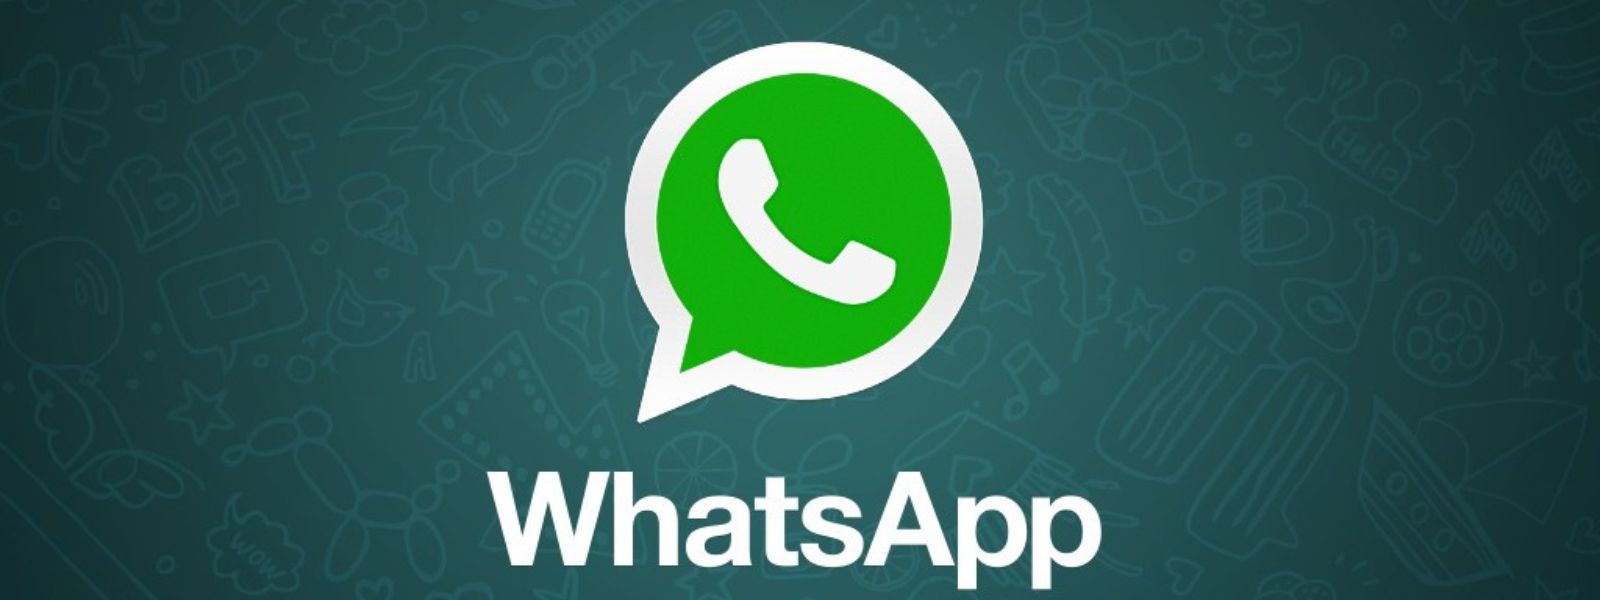 WhatsApp to release several exciting new features in 2023